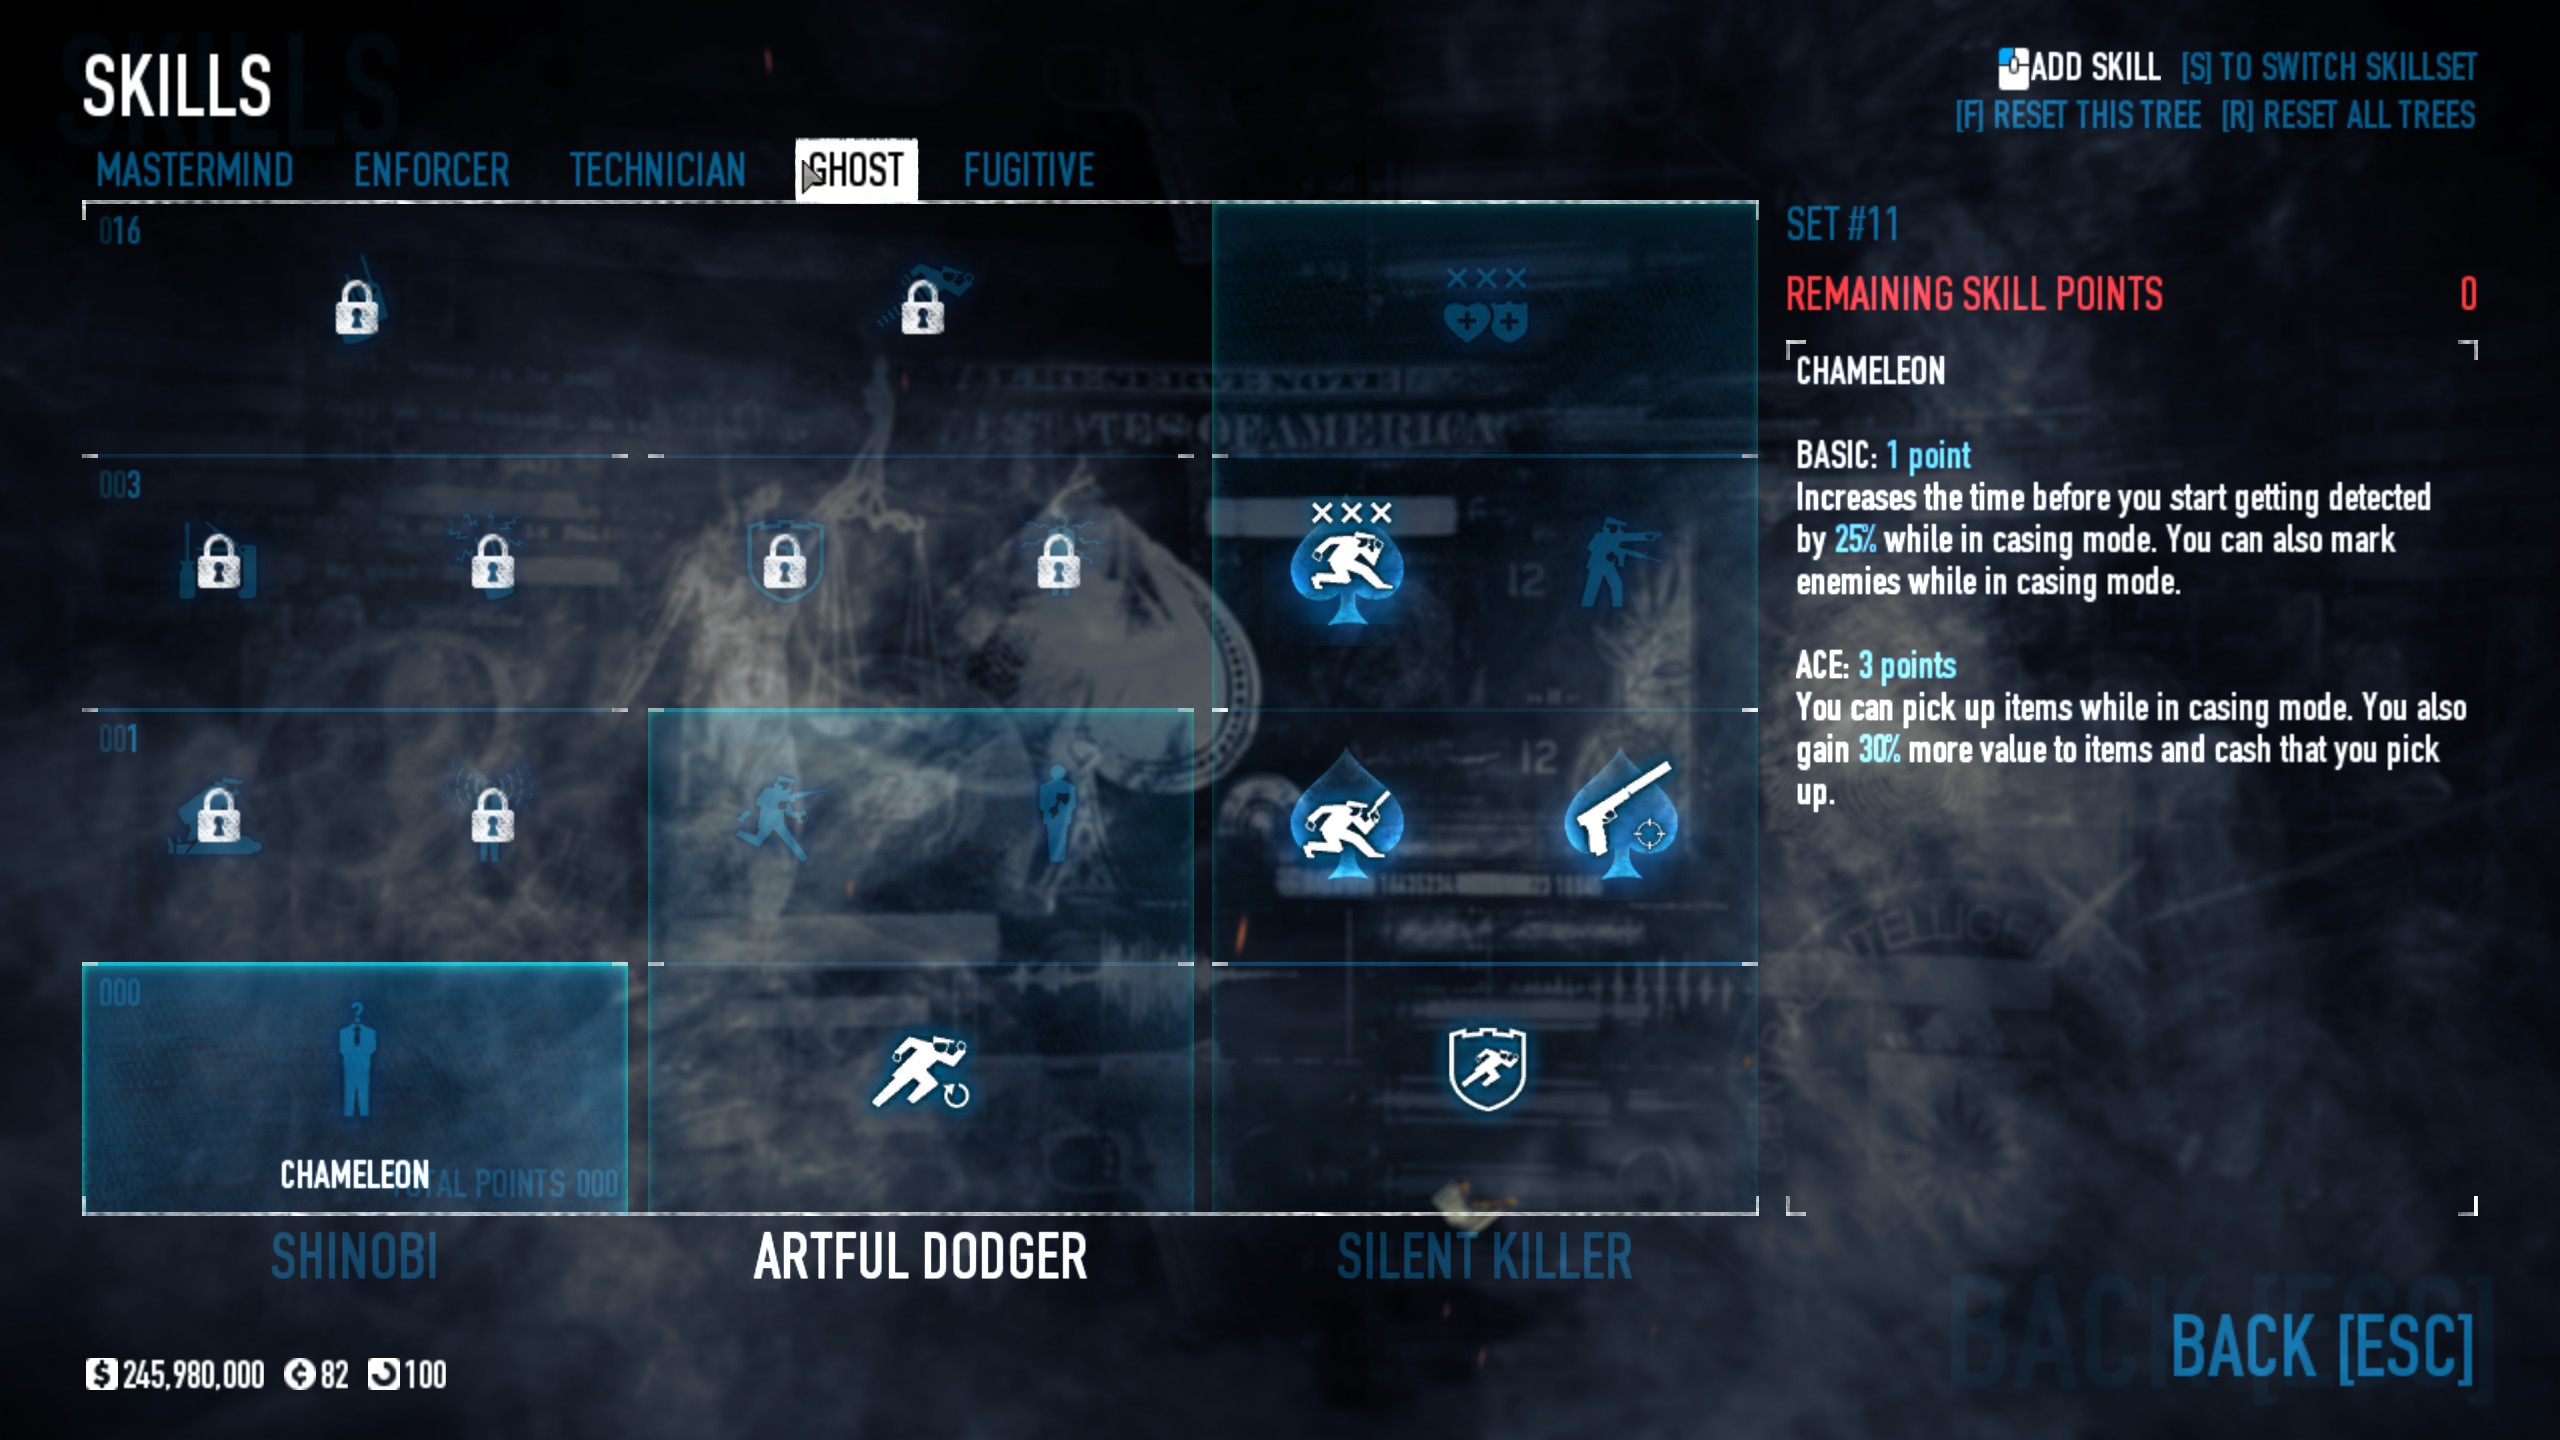 PAYDAY 2 Best SMG Build for Anarchist - -Skills, Chapter One- - A1BA874